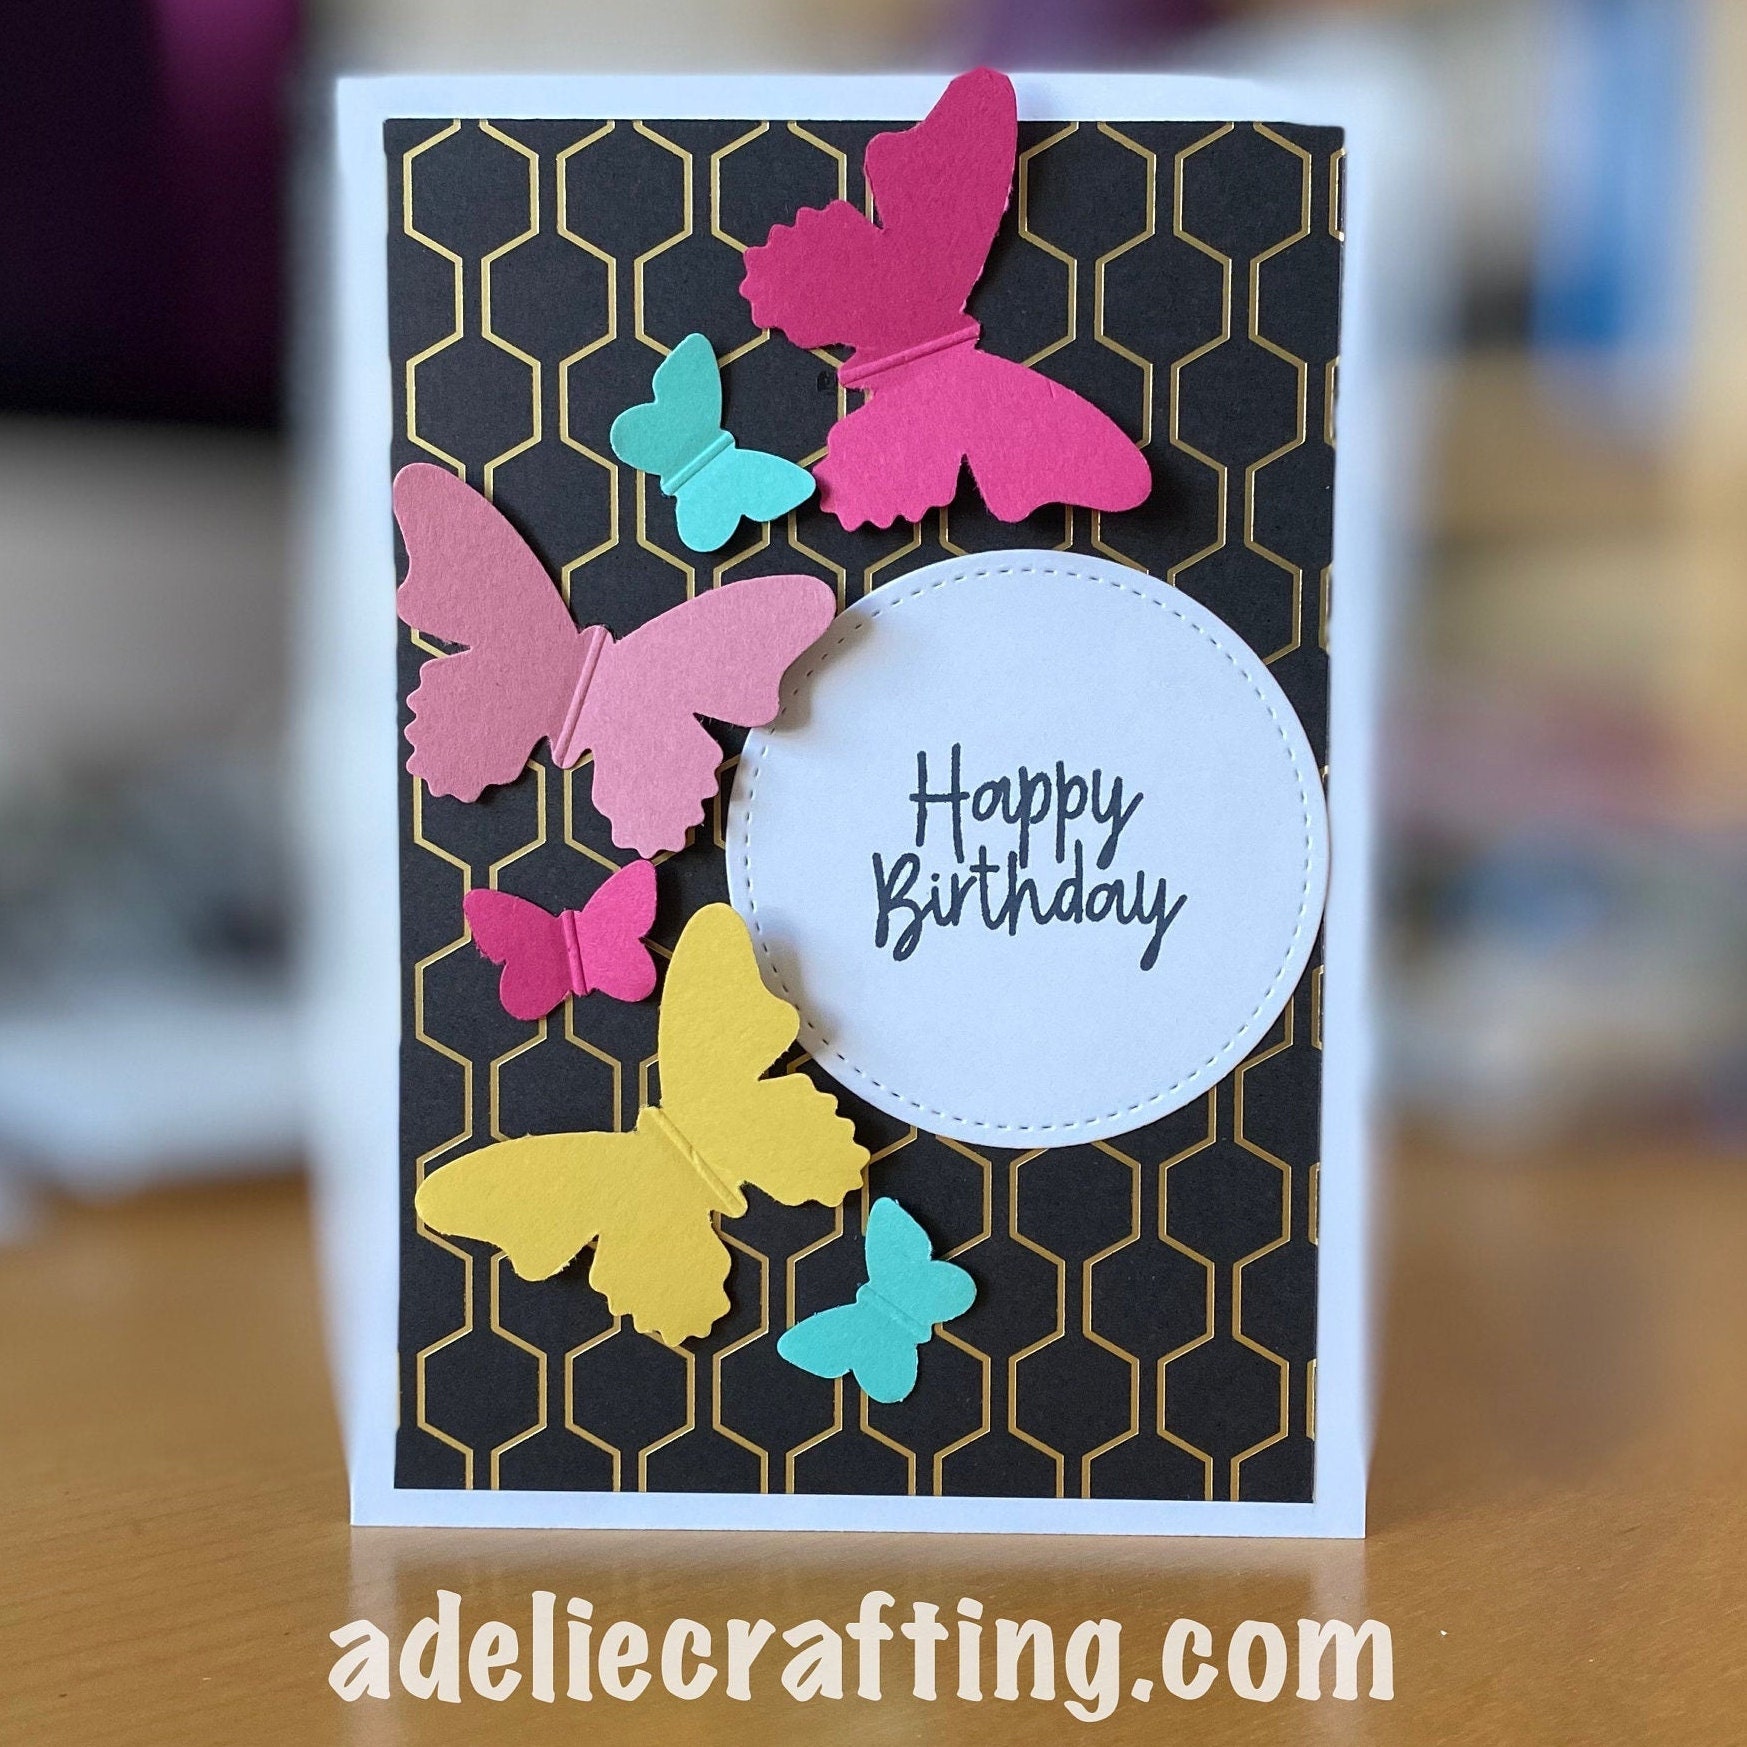 Free Printable Birthday Cards With Butterflies